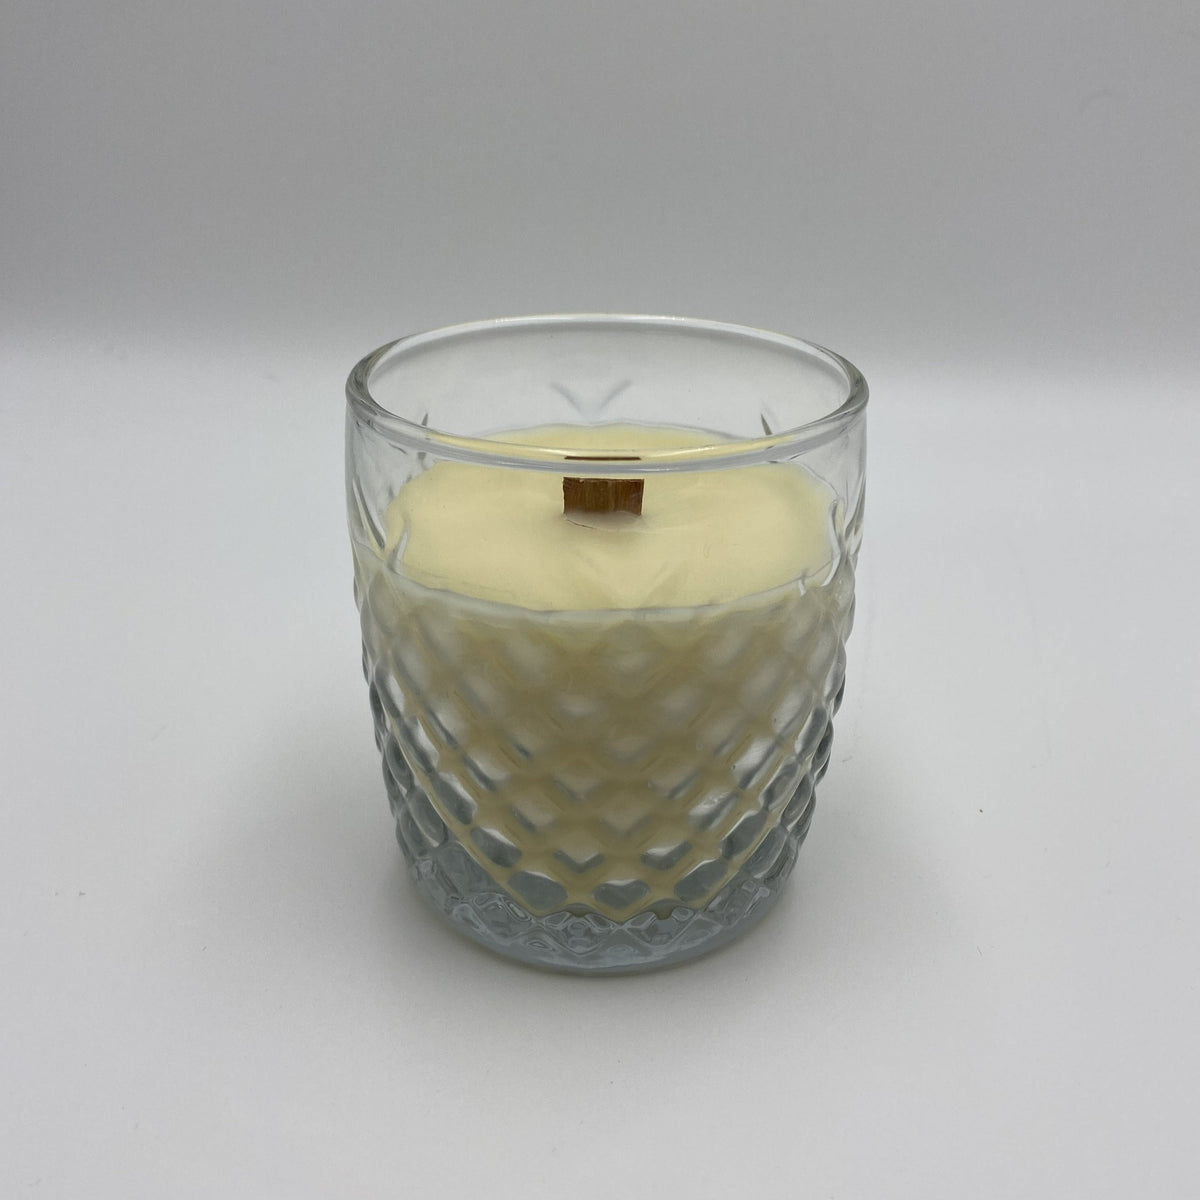 10.5oz Cross-Hatch Glass with Crackling Wooden Wick - Green Ash Decor